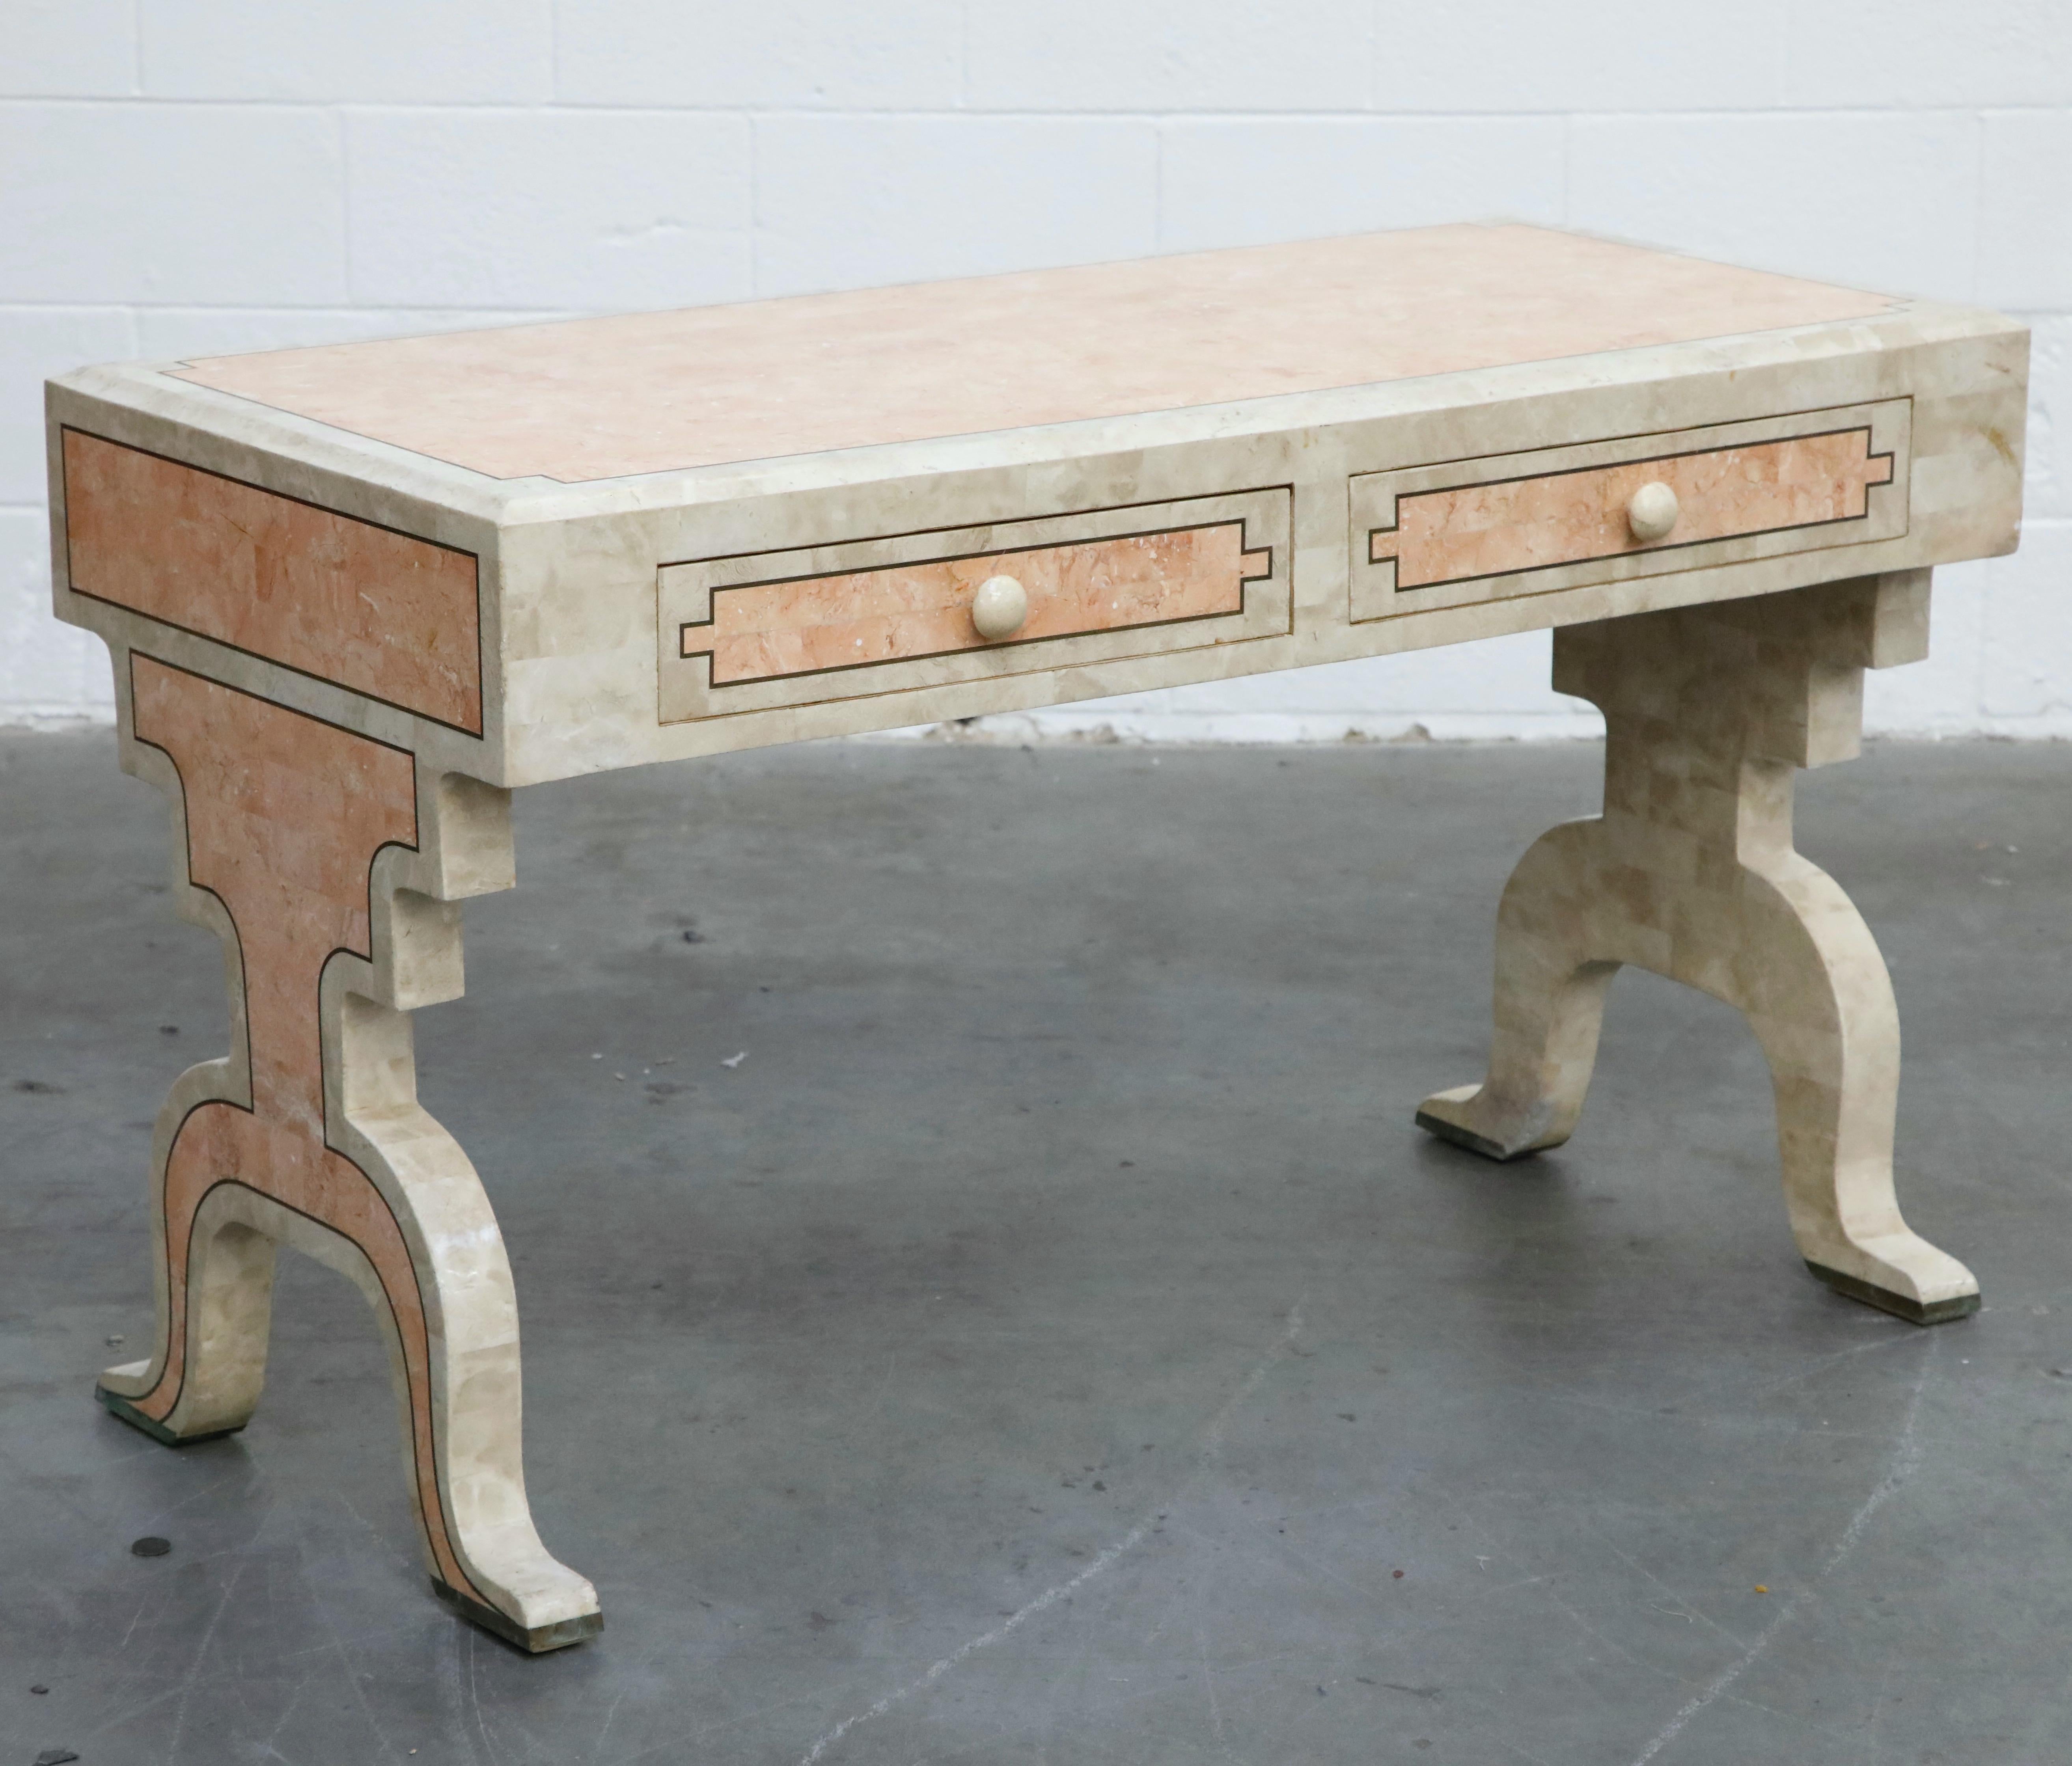 This gorgeous Maitland Smith two-drawer desk features impressive tessellated pink marble and stone with brass inlays. This beautiful circa 1980s desk is in an Art Deco and Hollywood Regency stye with shaped legs and compact size ideal for smaller